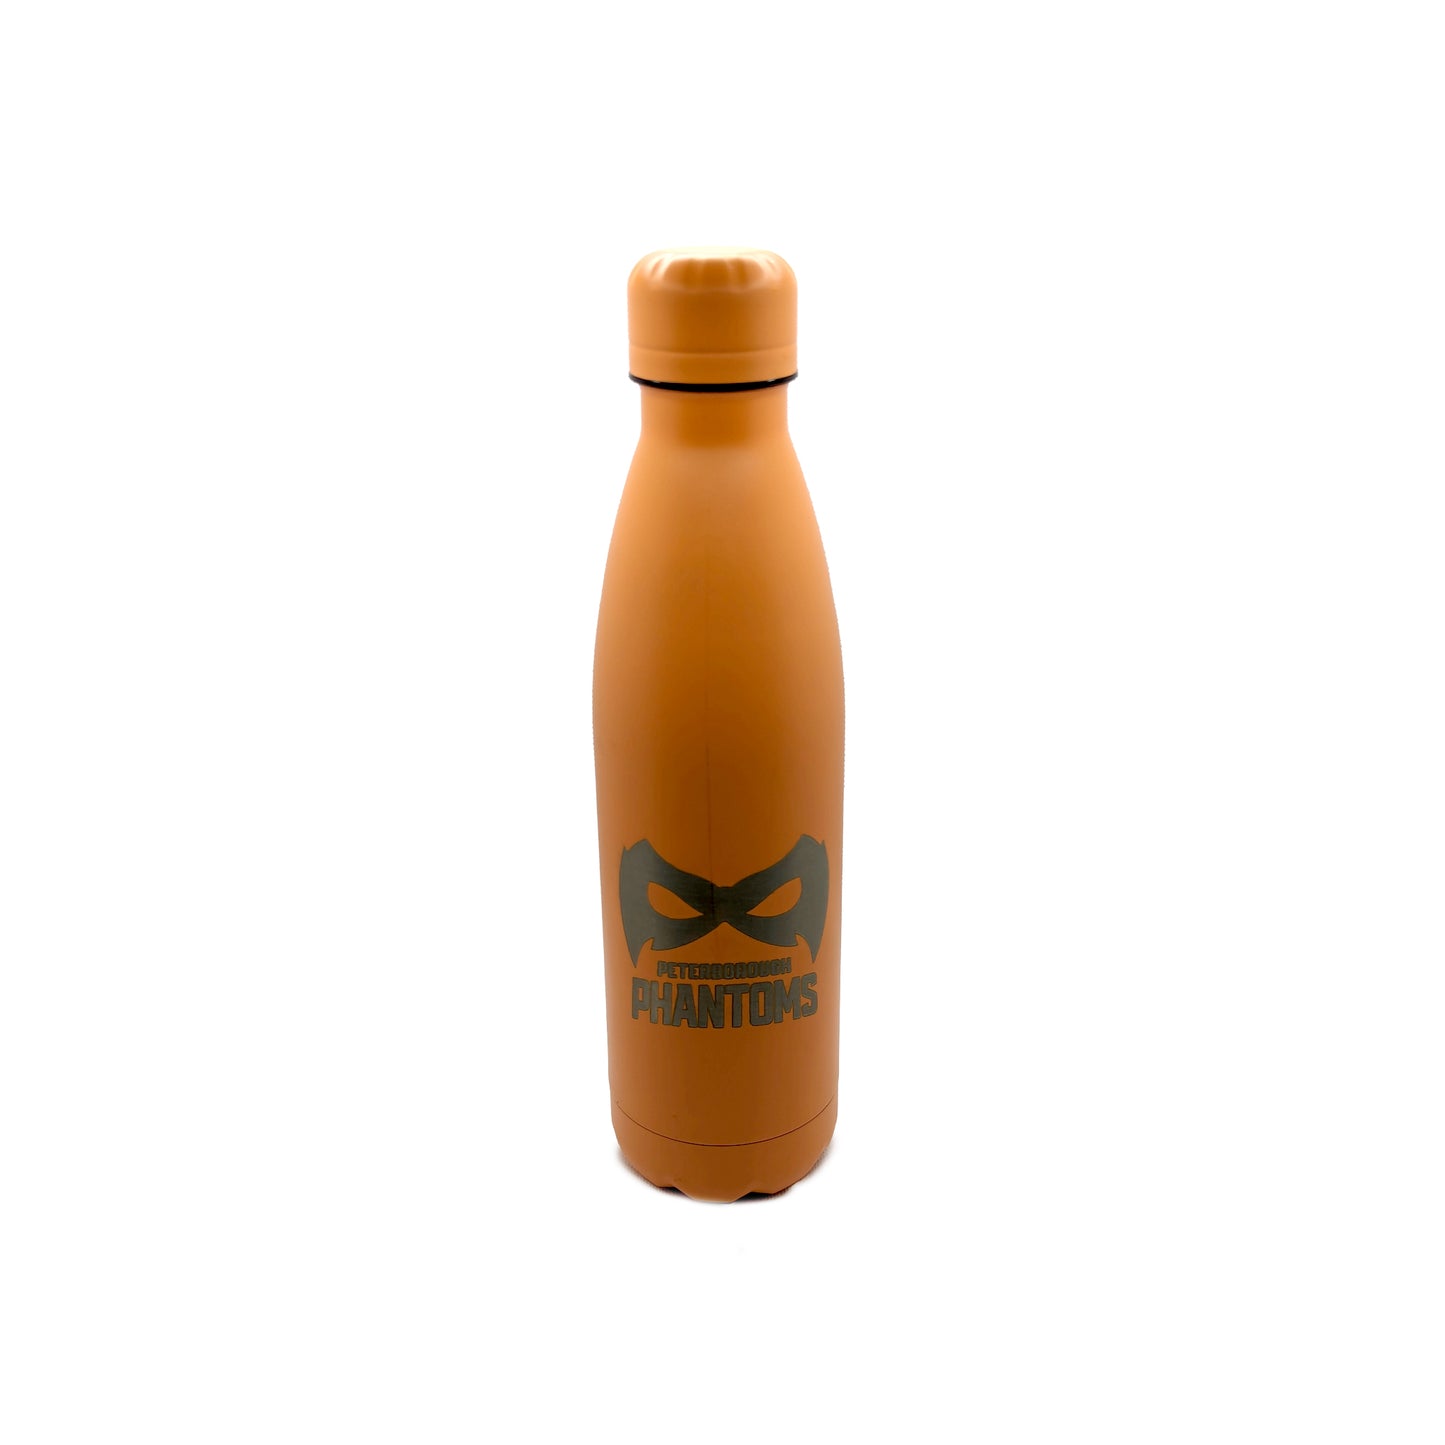 Performance Stainless Steel Sports Water Bottle